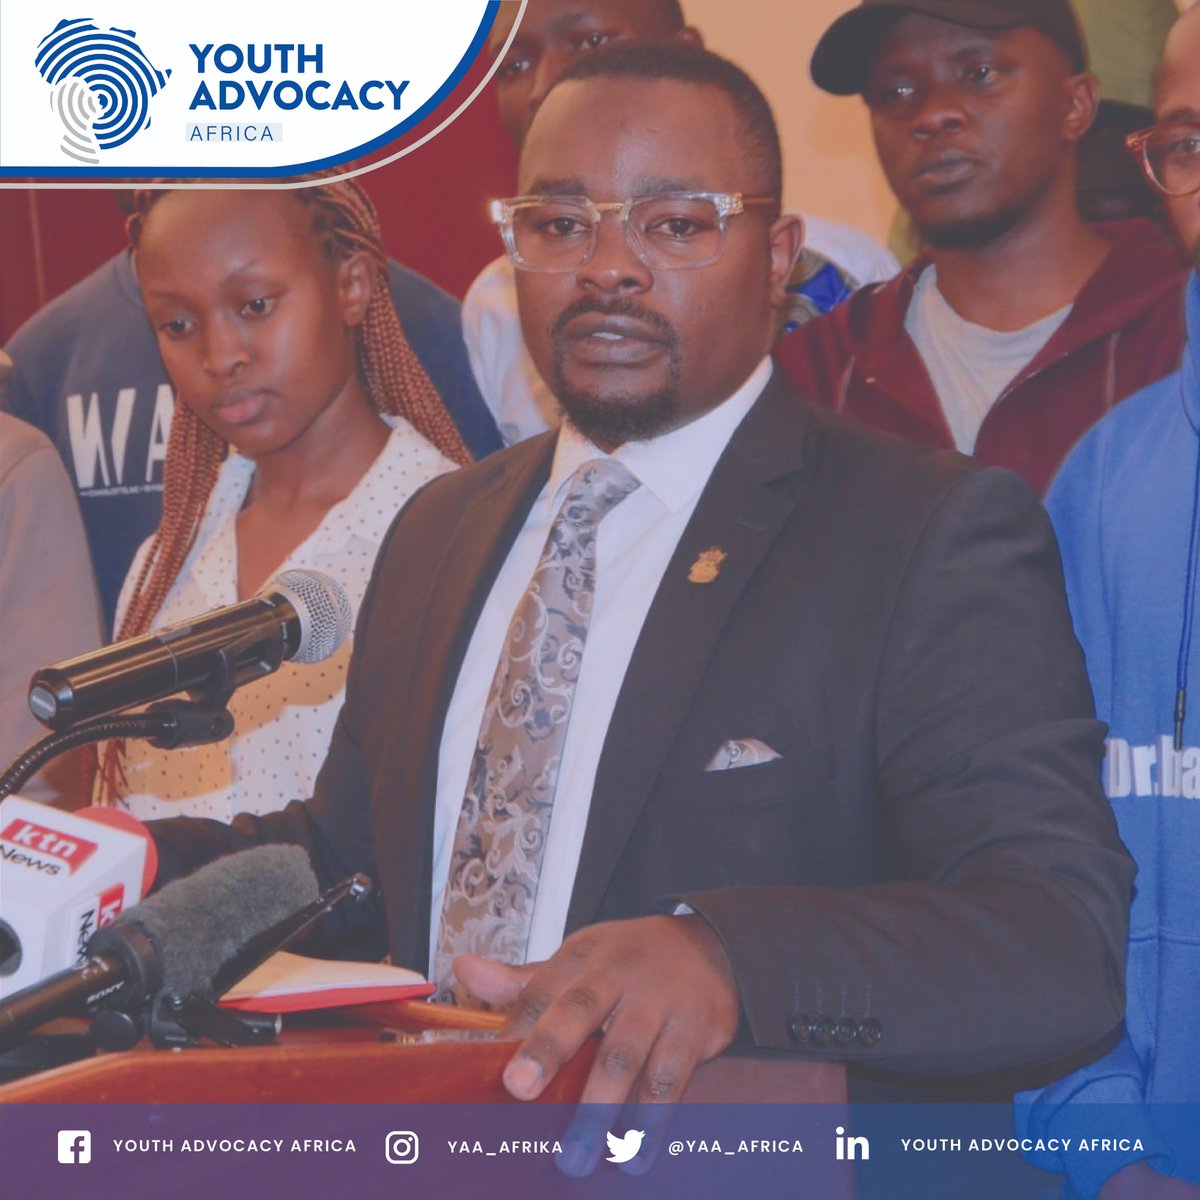 As a population with the highest #demographicdividend, young people’s contemporary issues call for resource #investment to address and let their voices be heard in the #economic, #political, and #social spheres. Visit our website: youthadvocacyafrica.org #YOUTH #youthempowerment